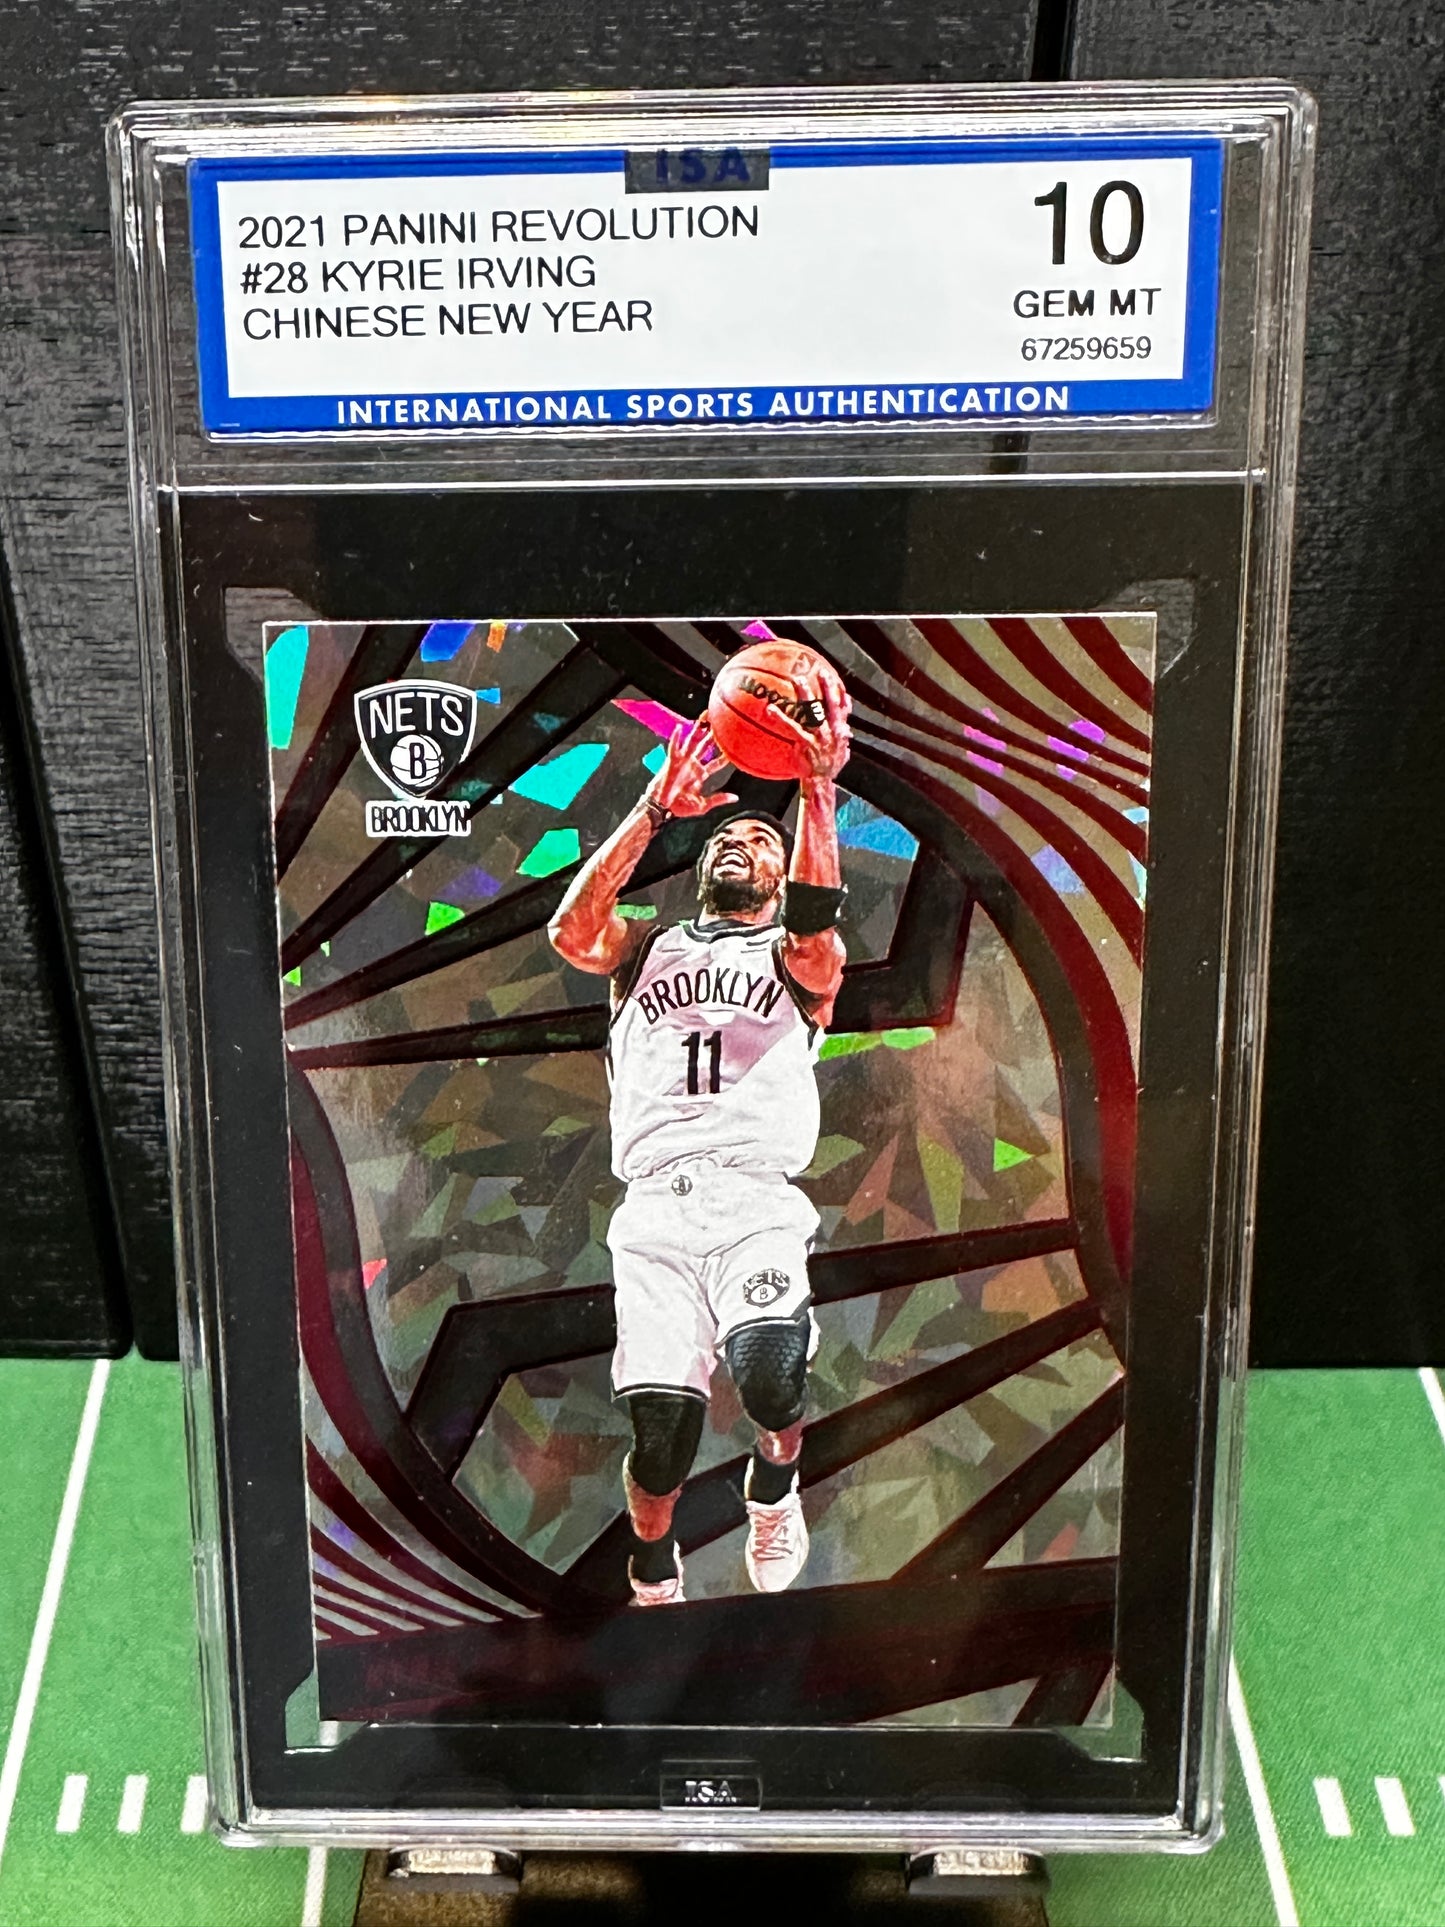 21/22 Revolution Kyrie Irving Chinese new year ISA 10